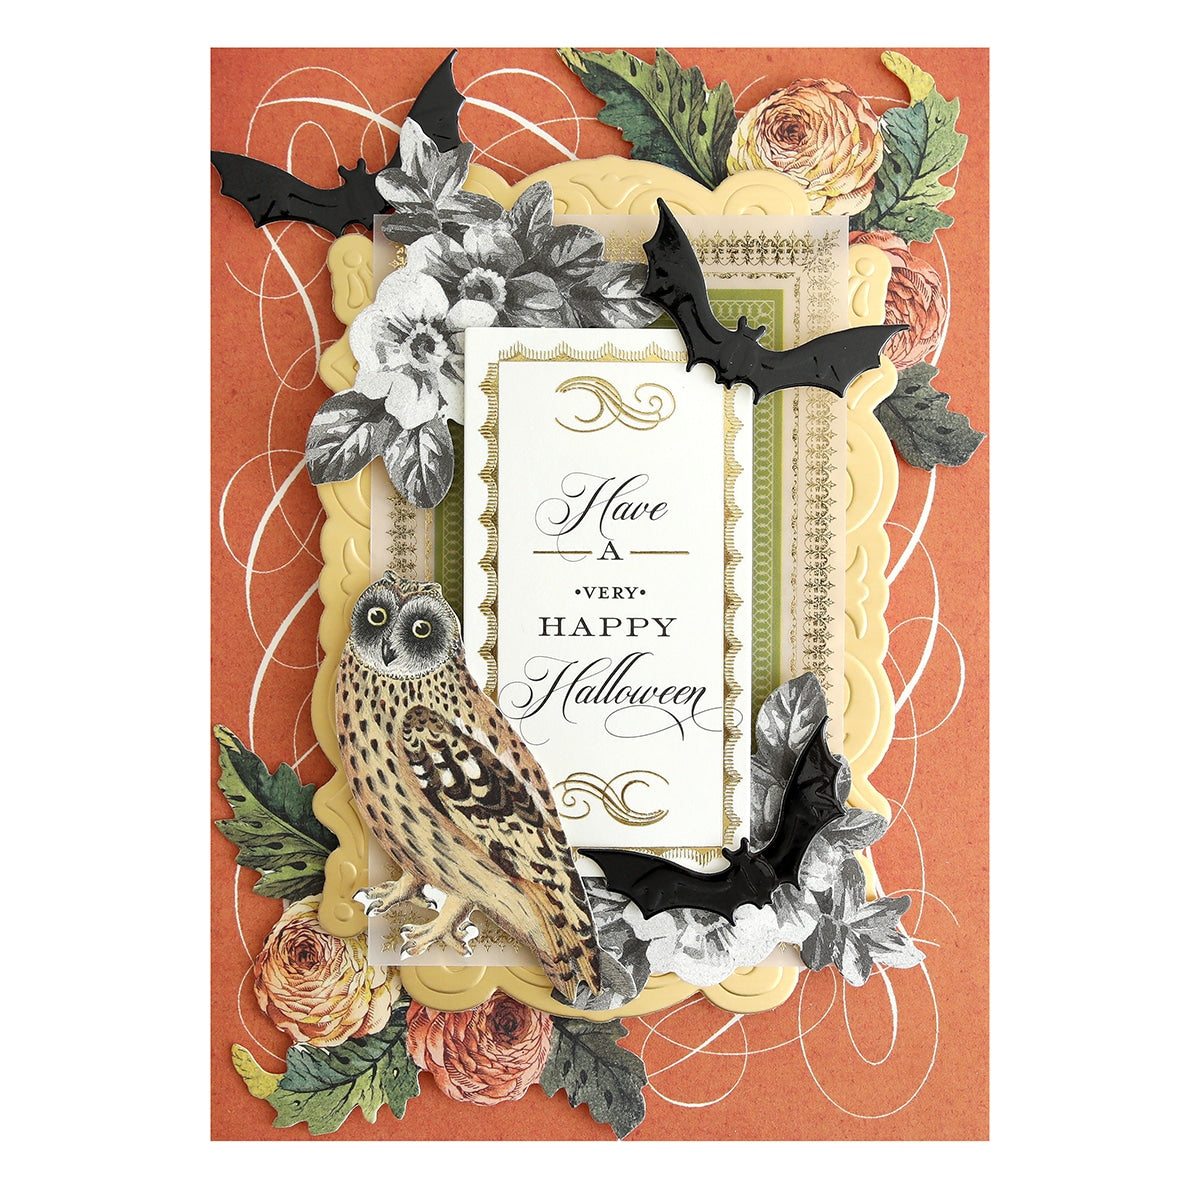 a card with an owl and flowers on it.